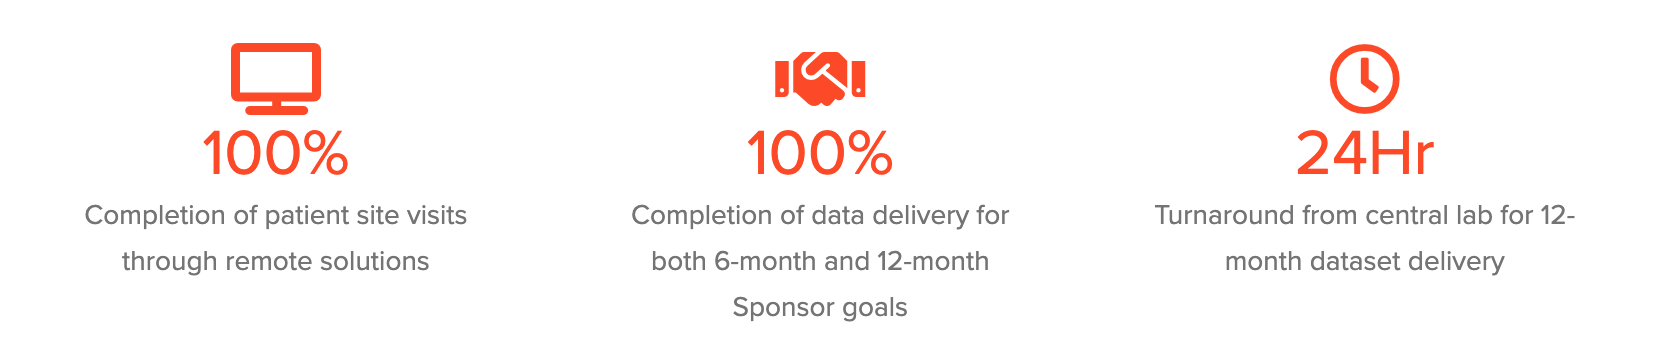 Completion of patient site visits through remote solutions | Completion of data delivery for both 6-month and 12-month Sponsor goals | Turnaround from central lab for 12-month dataset delivery